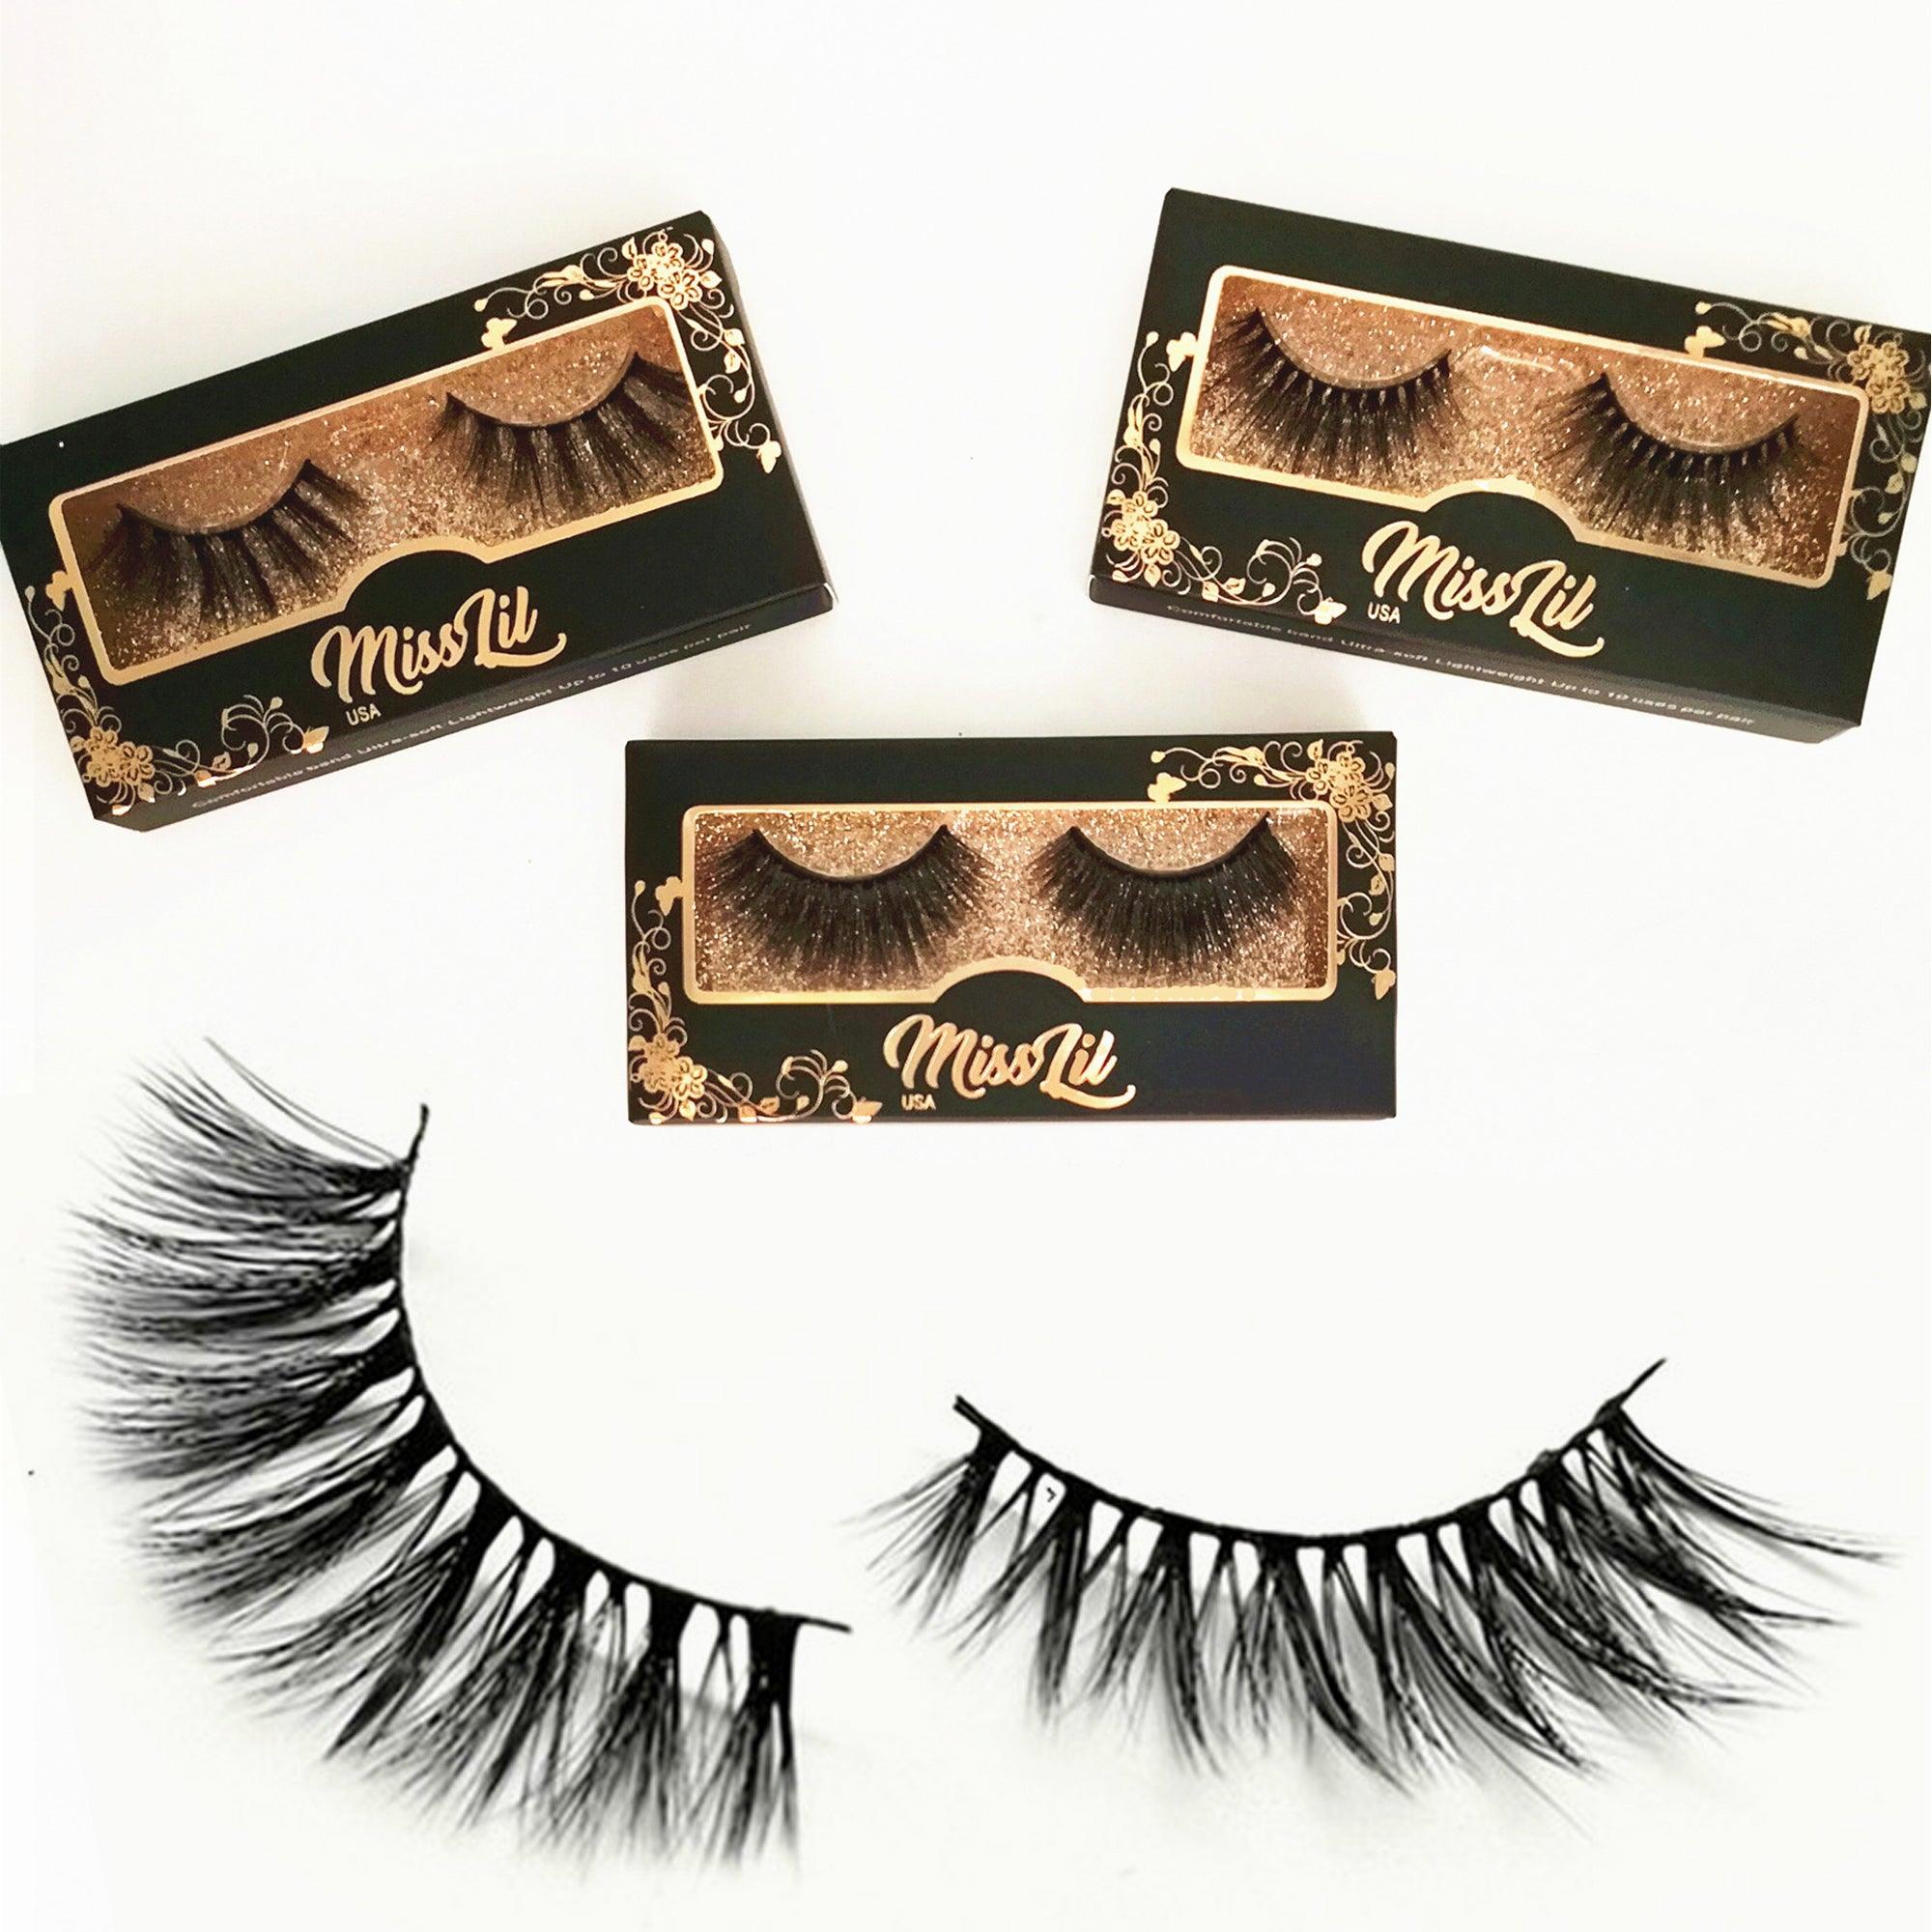 1-Pair Miss Lil USA Lashes #38 (Pack of 12) - Miss Lil USA Wholesale